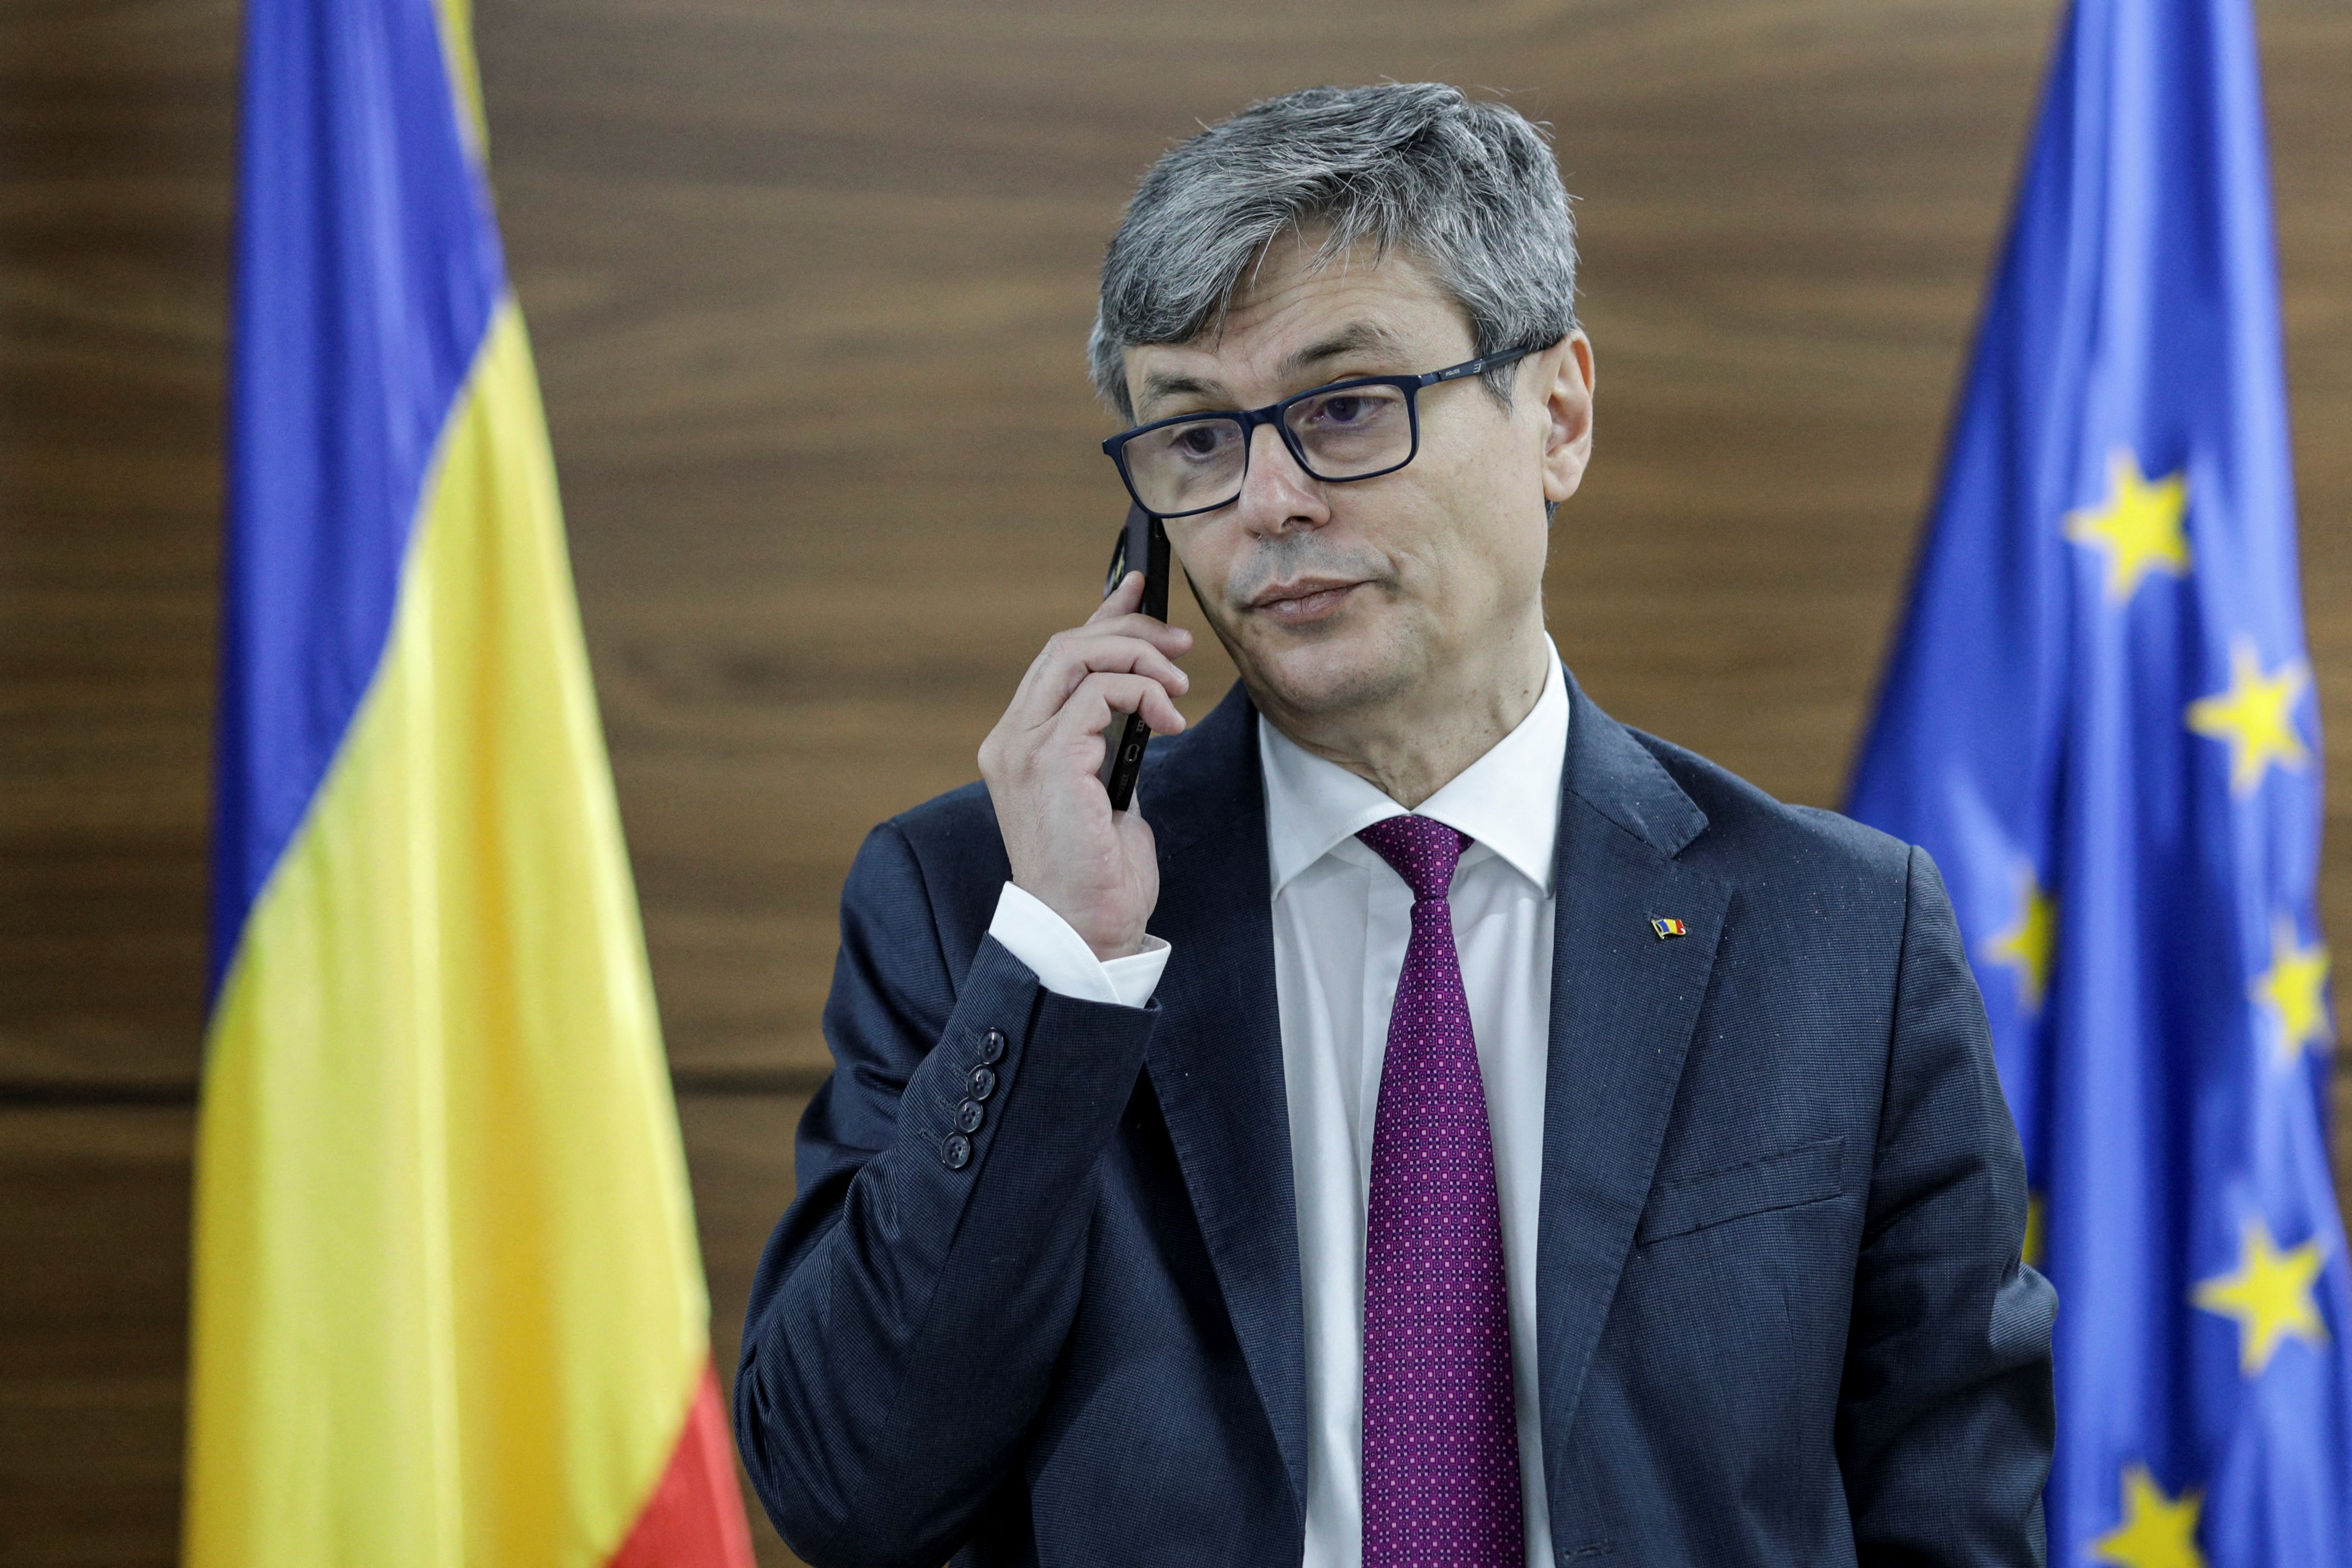 Romanian Energy Minister, Virgil Popescu, talks on the phone before an interview with Reuters, in Bucharest, Romania, January 13, 2022. Inquam Photos/Octav Ganea via REUTERS